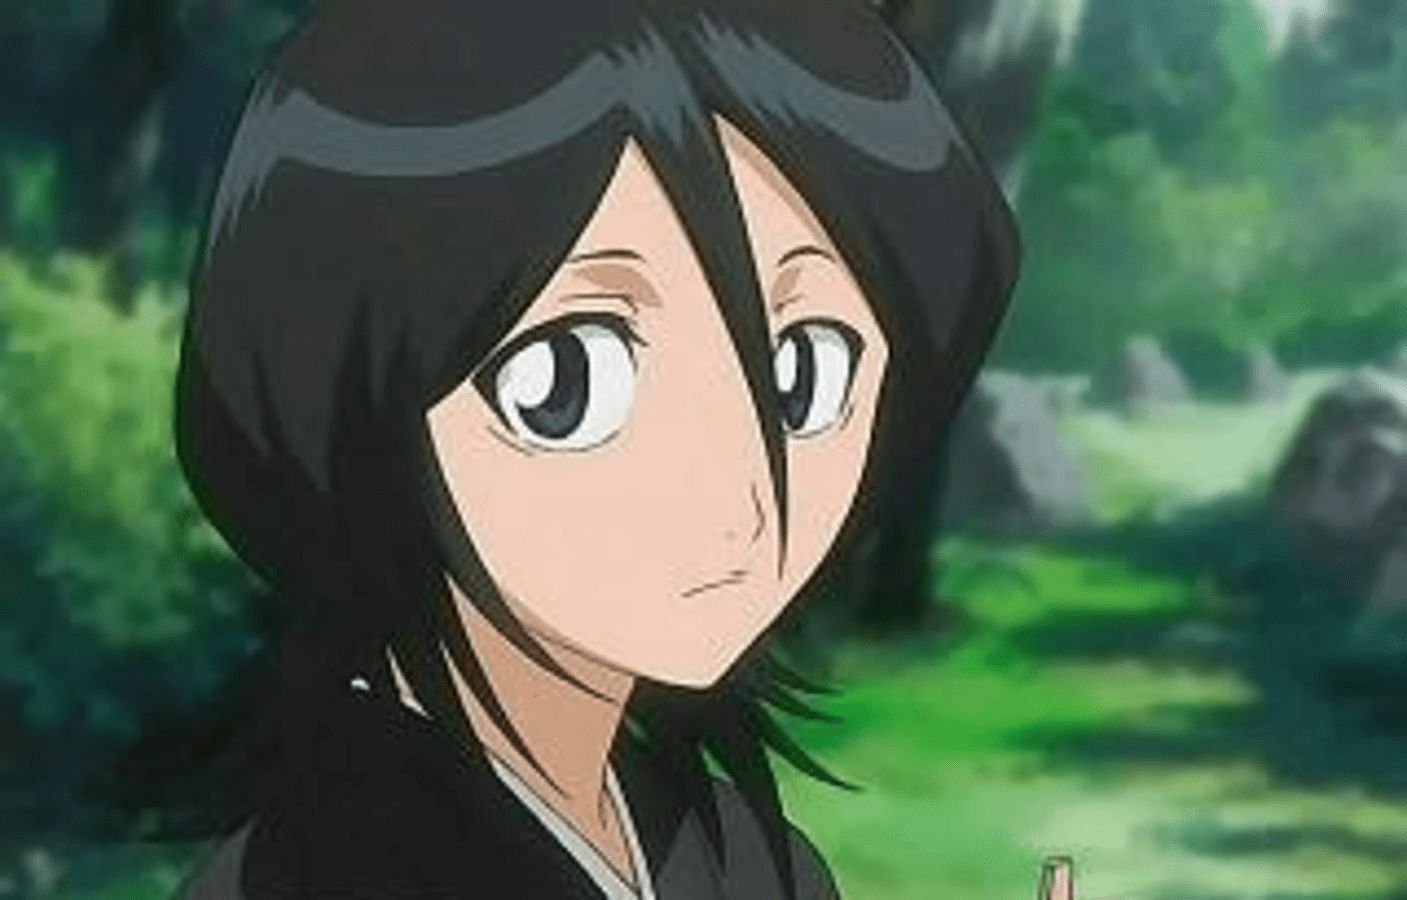 Rukia Kuchiki, one of the most popular and important Bleach characters (Image via Studio Pierrot)